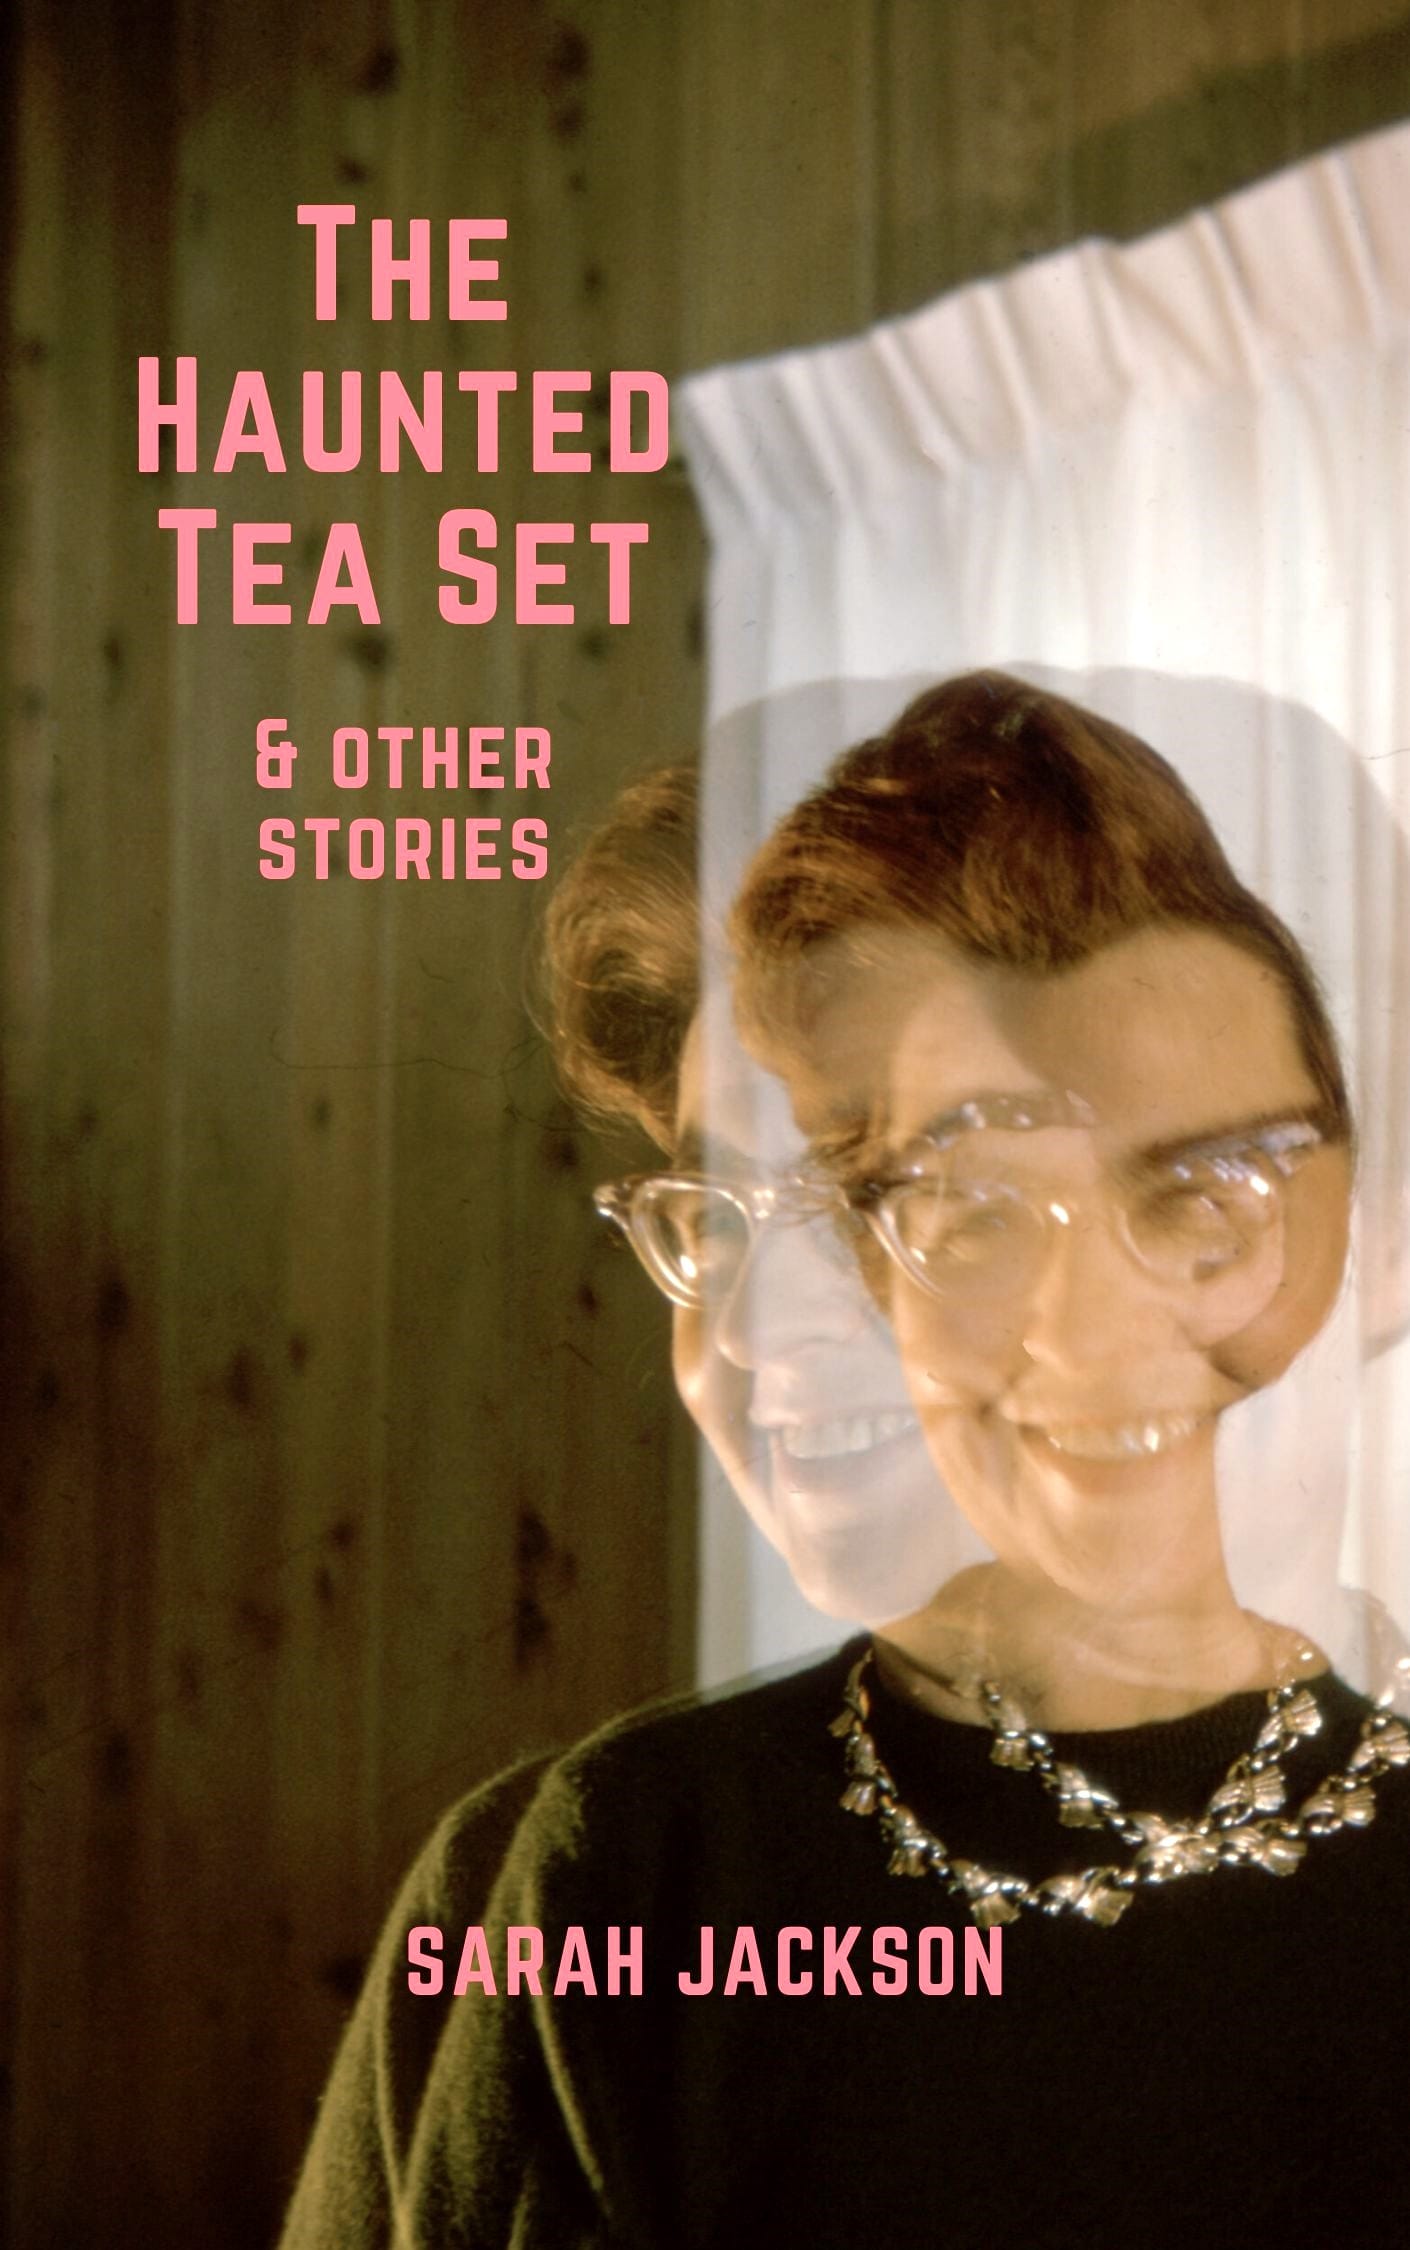 Book cover shows a vintage photograph of a smiling white woman in elegant clothes and cats eye glasses with a ghostly double 